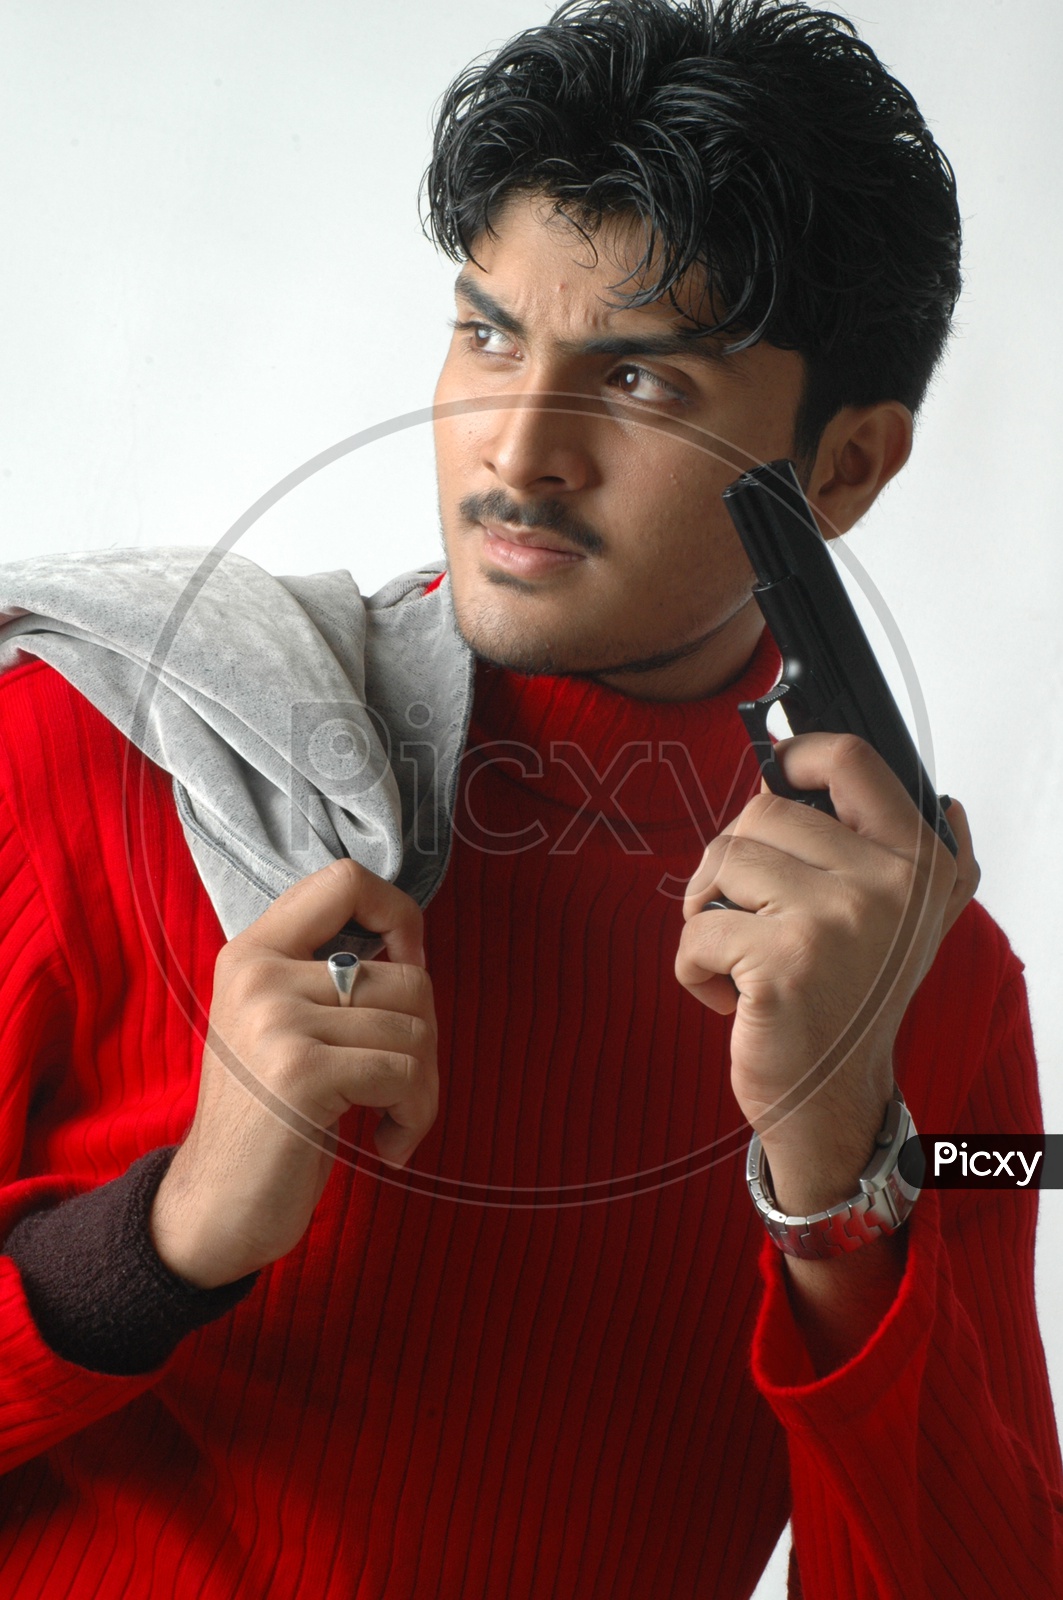 A Young Indian Man Holding Gun  And  Posing  On an Isolated White Background